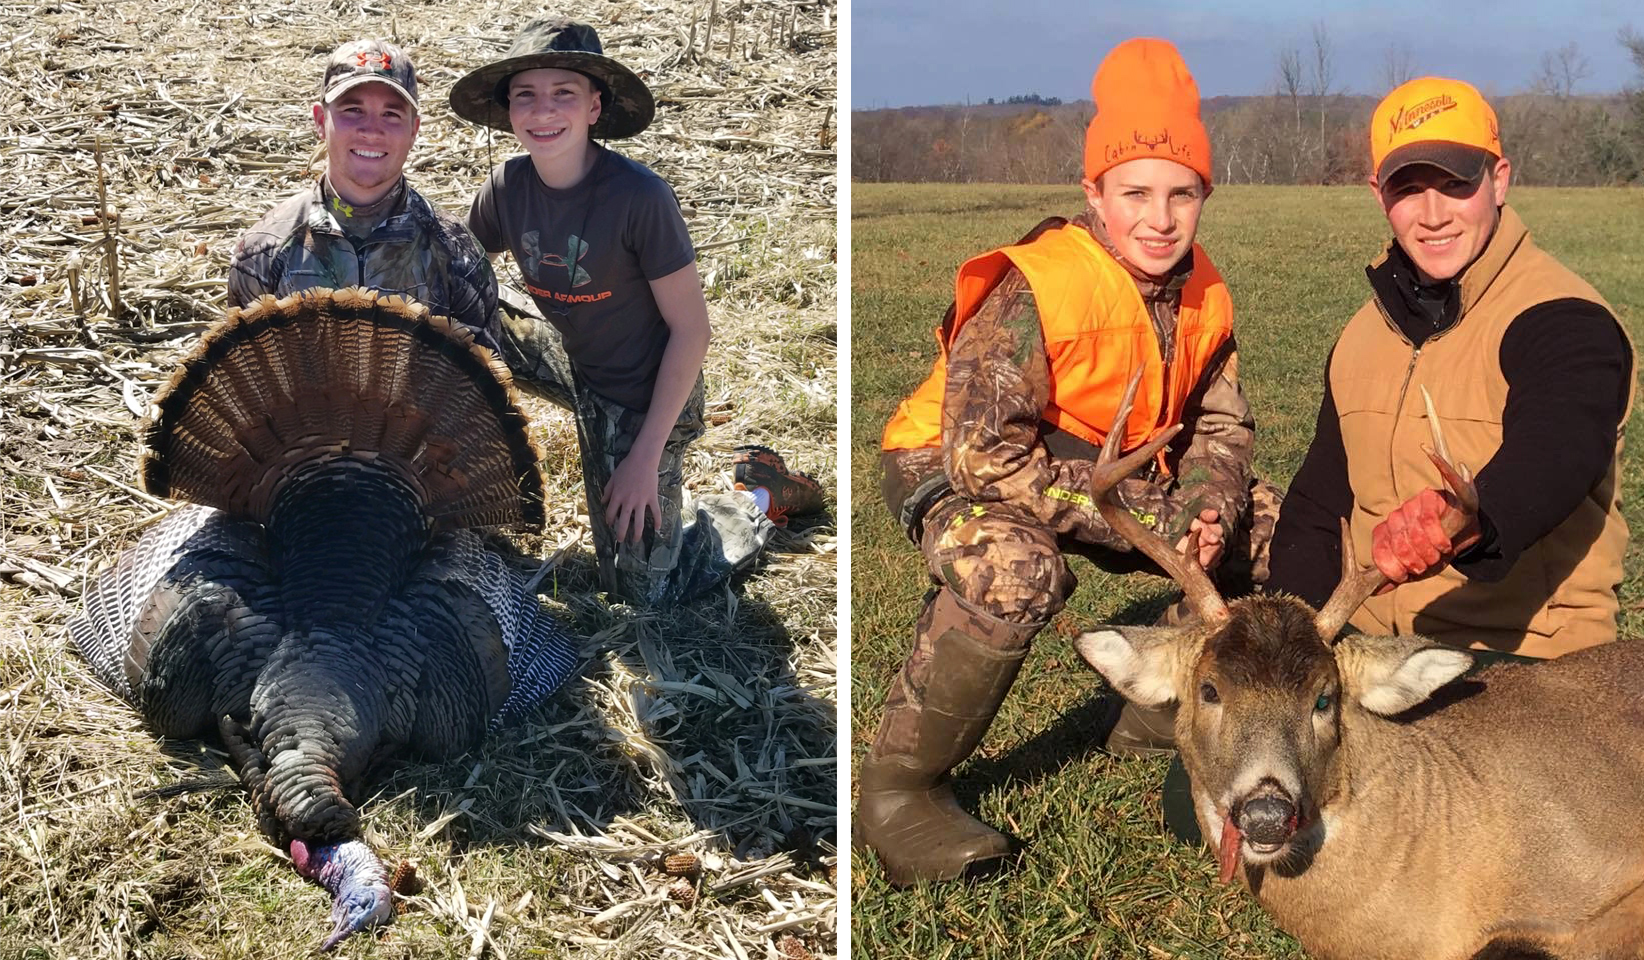 Two side-by-side photos of an older and younger brother, smiling together with a spring tom turkey and a fall whitetail buck.